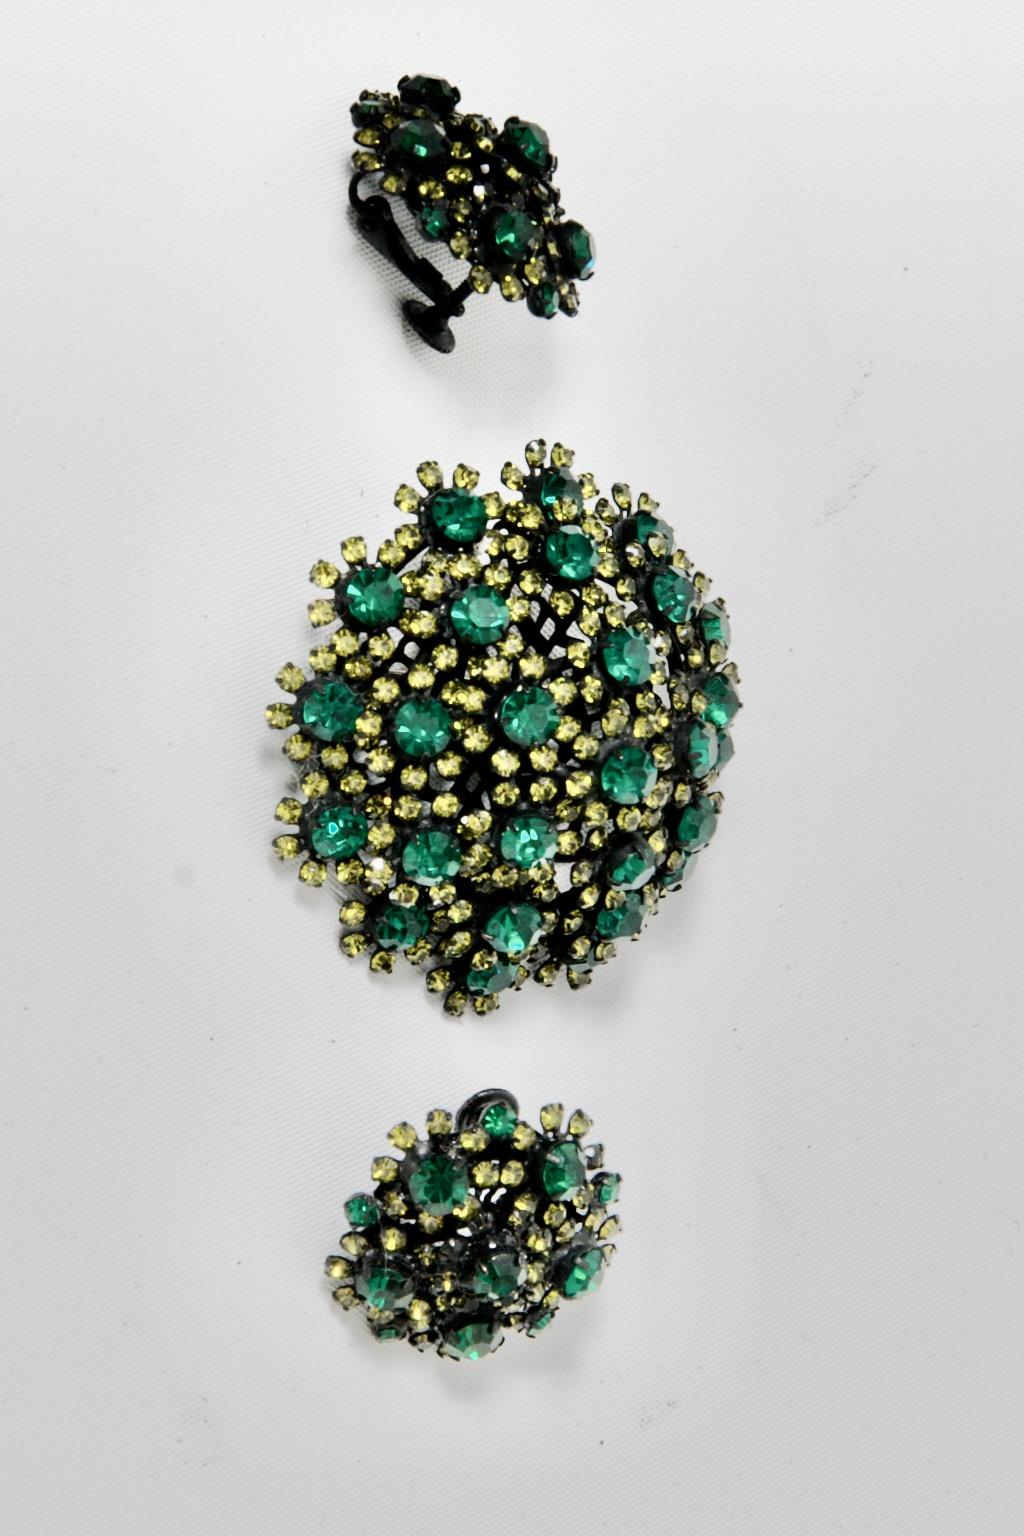 Vendome semi-parure of dome-shaped brooch and clip-on earrings composed of large round green crystals, each surrounded by small lime-colored crystals in a floral manner, and each with a filigree frame of black metal. The earrings have adjustable